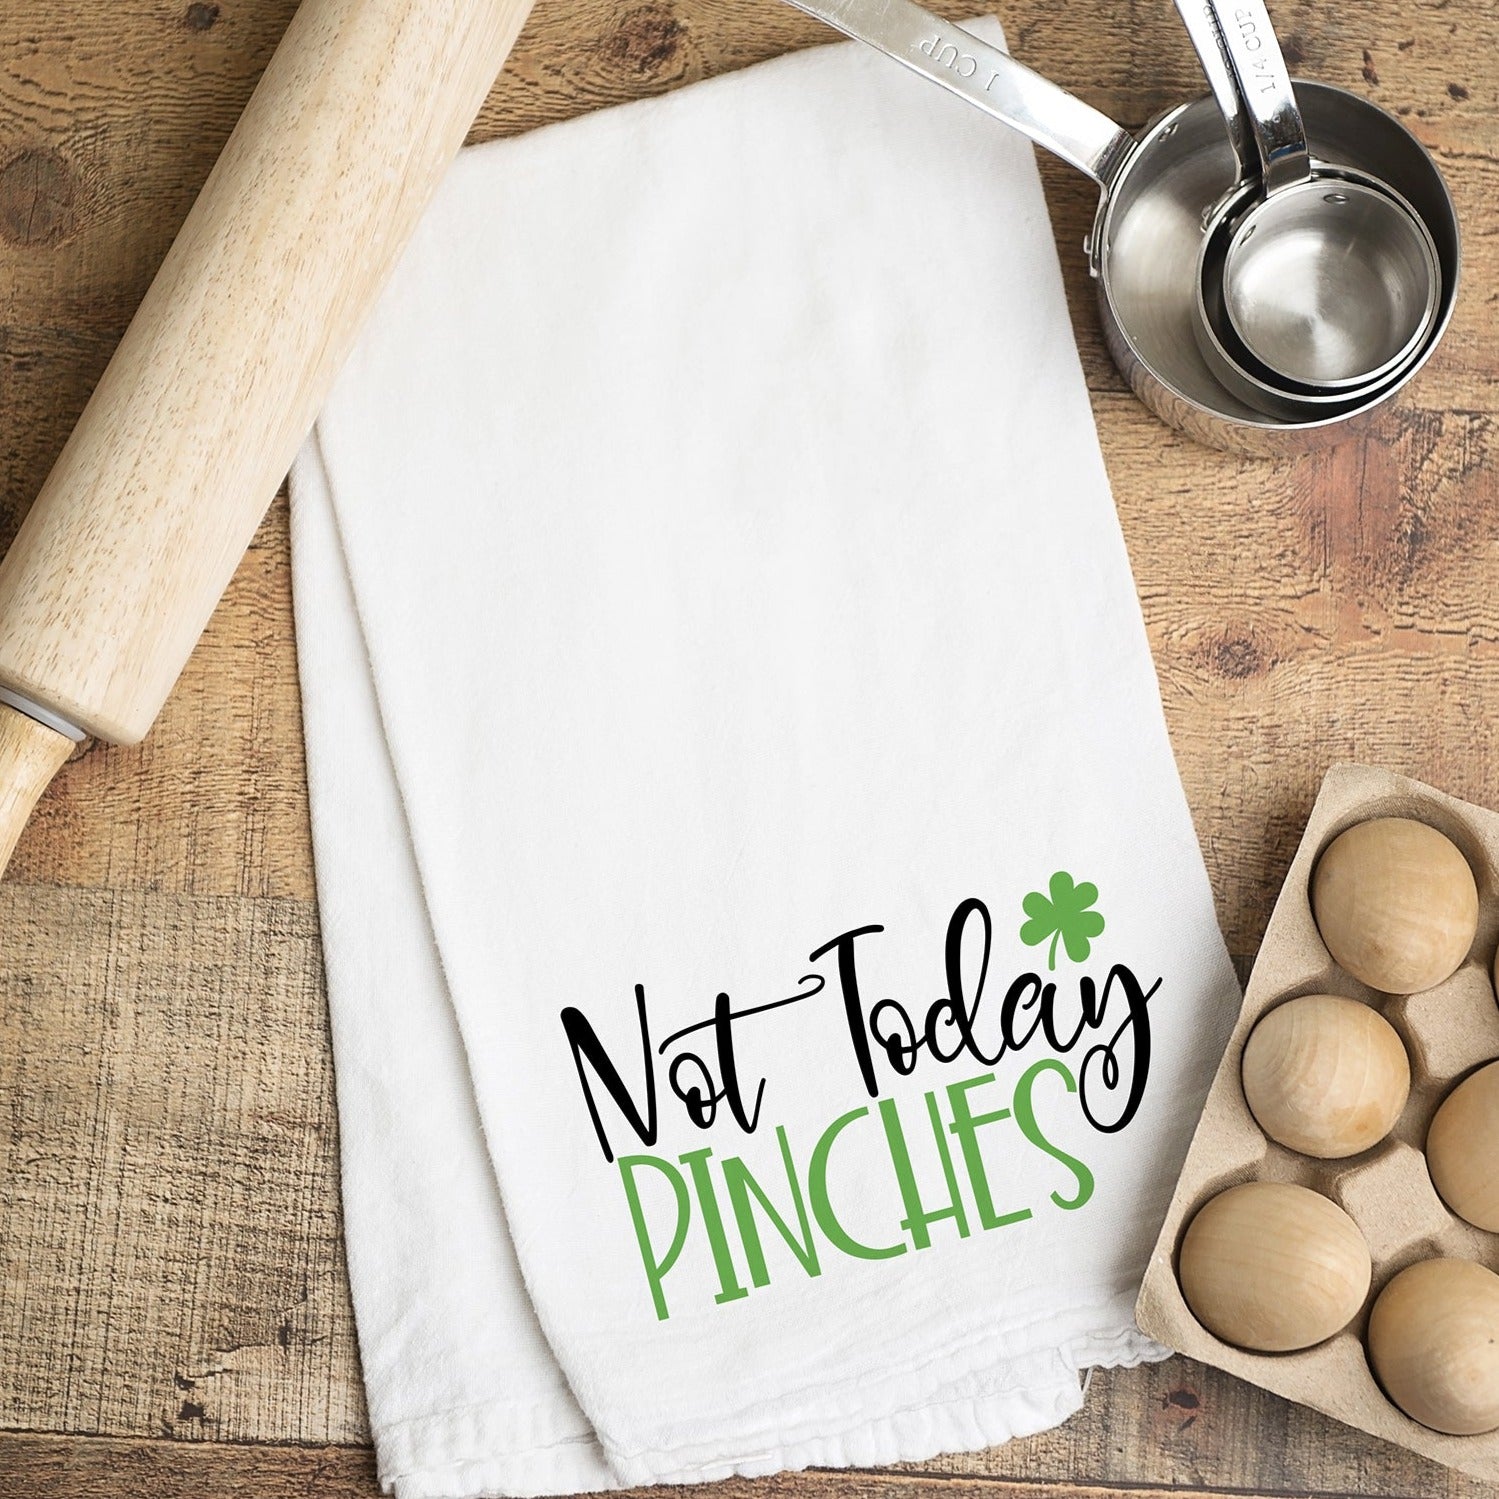 St. Patrick's Day dish towel - Not today Pinches | Pipsy.com